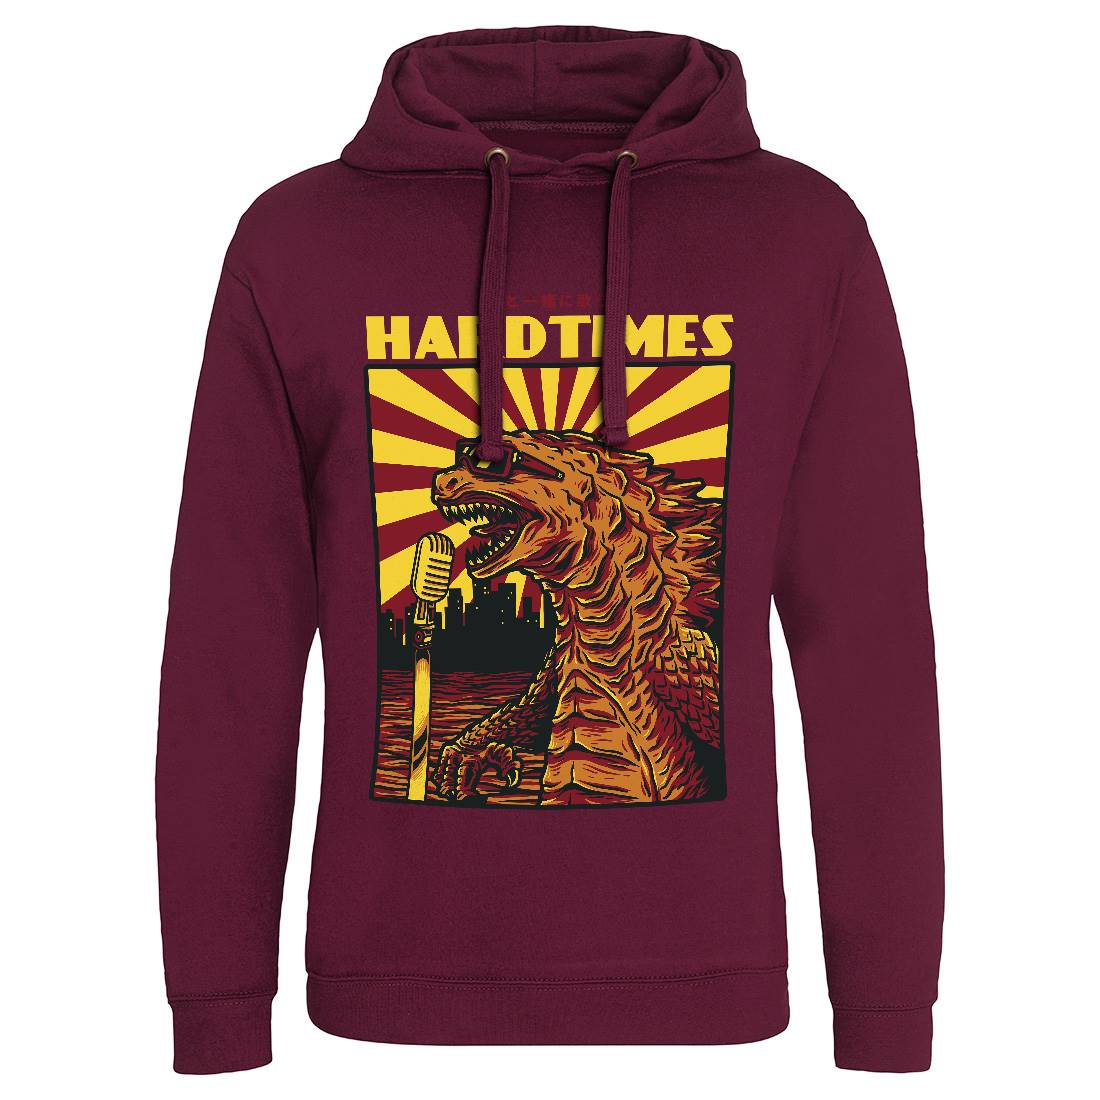 Hard Times Mens Hoodie Without Pocket Horror D608